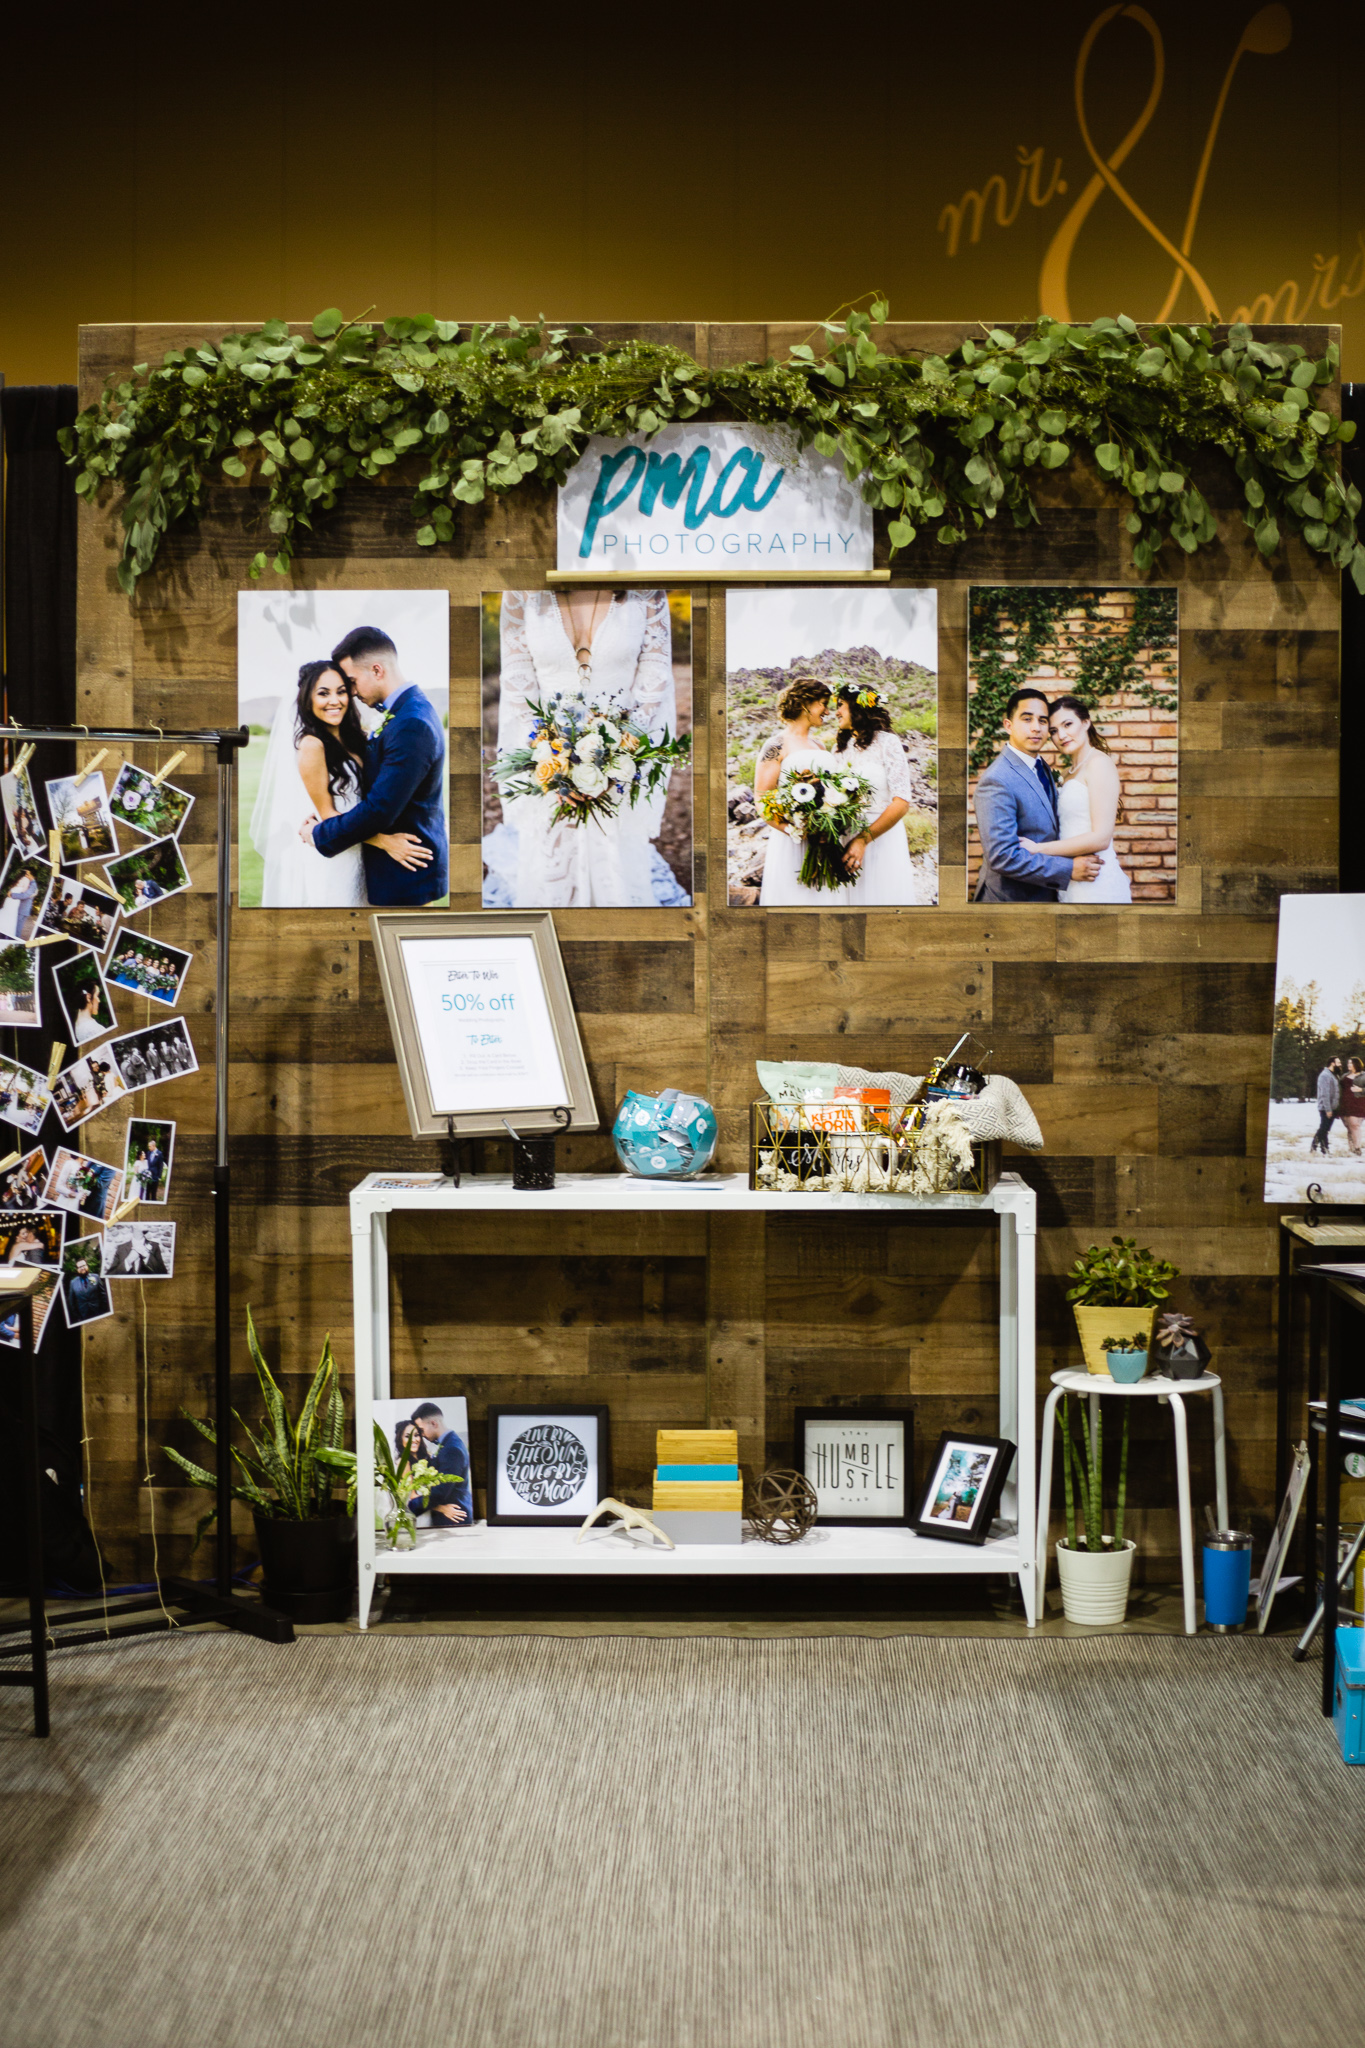 PMA Photography's wedding photography booth at the Arizona Bridal Show expo in Phoenix.